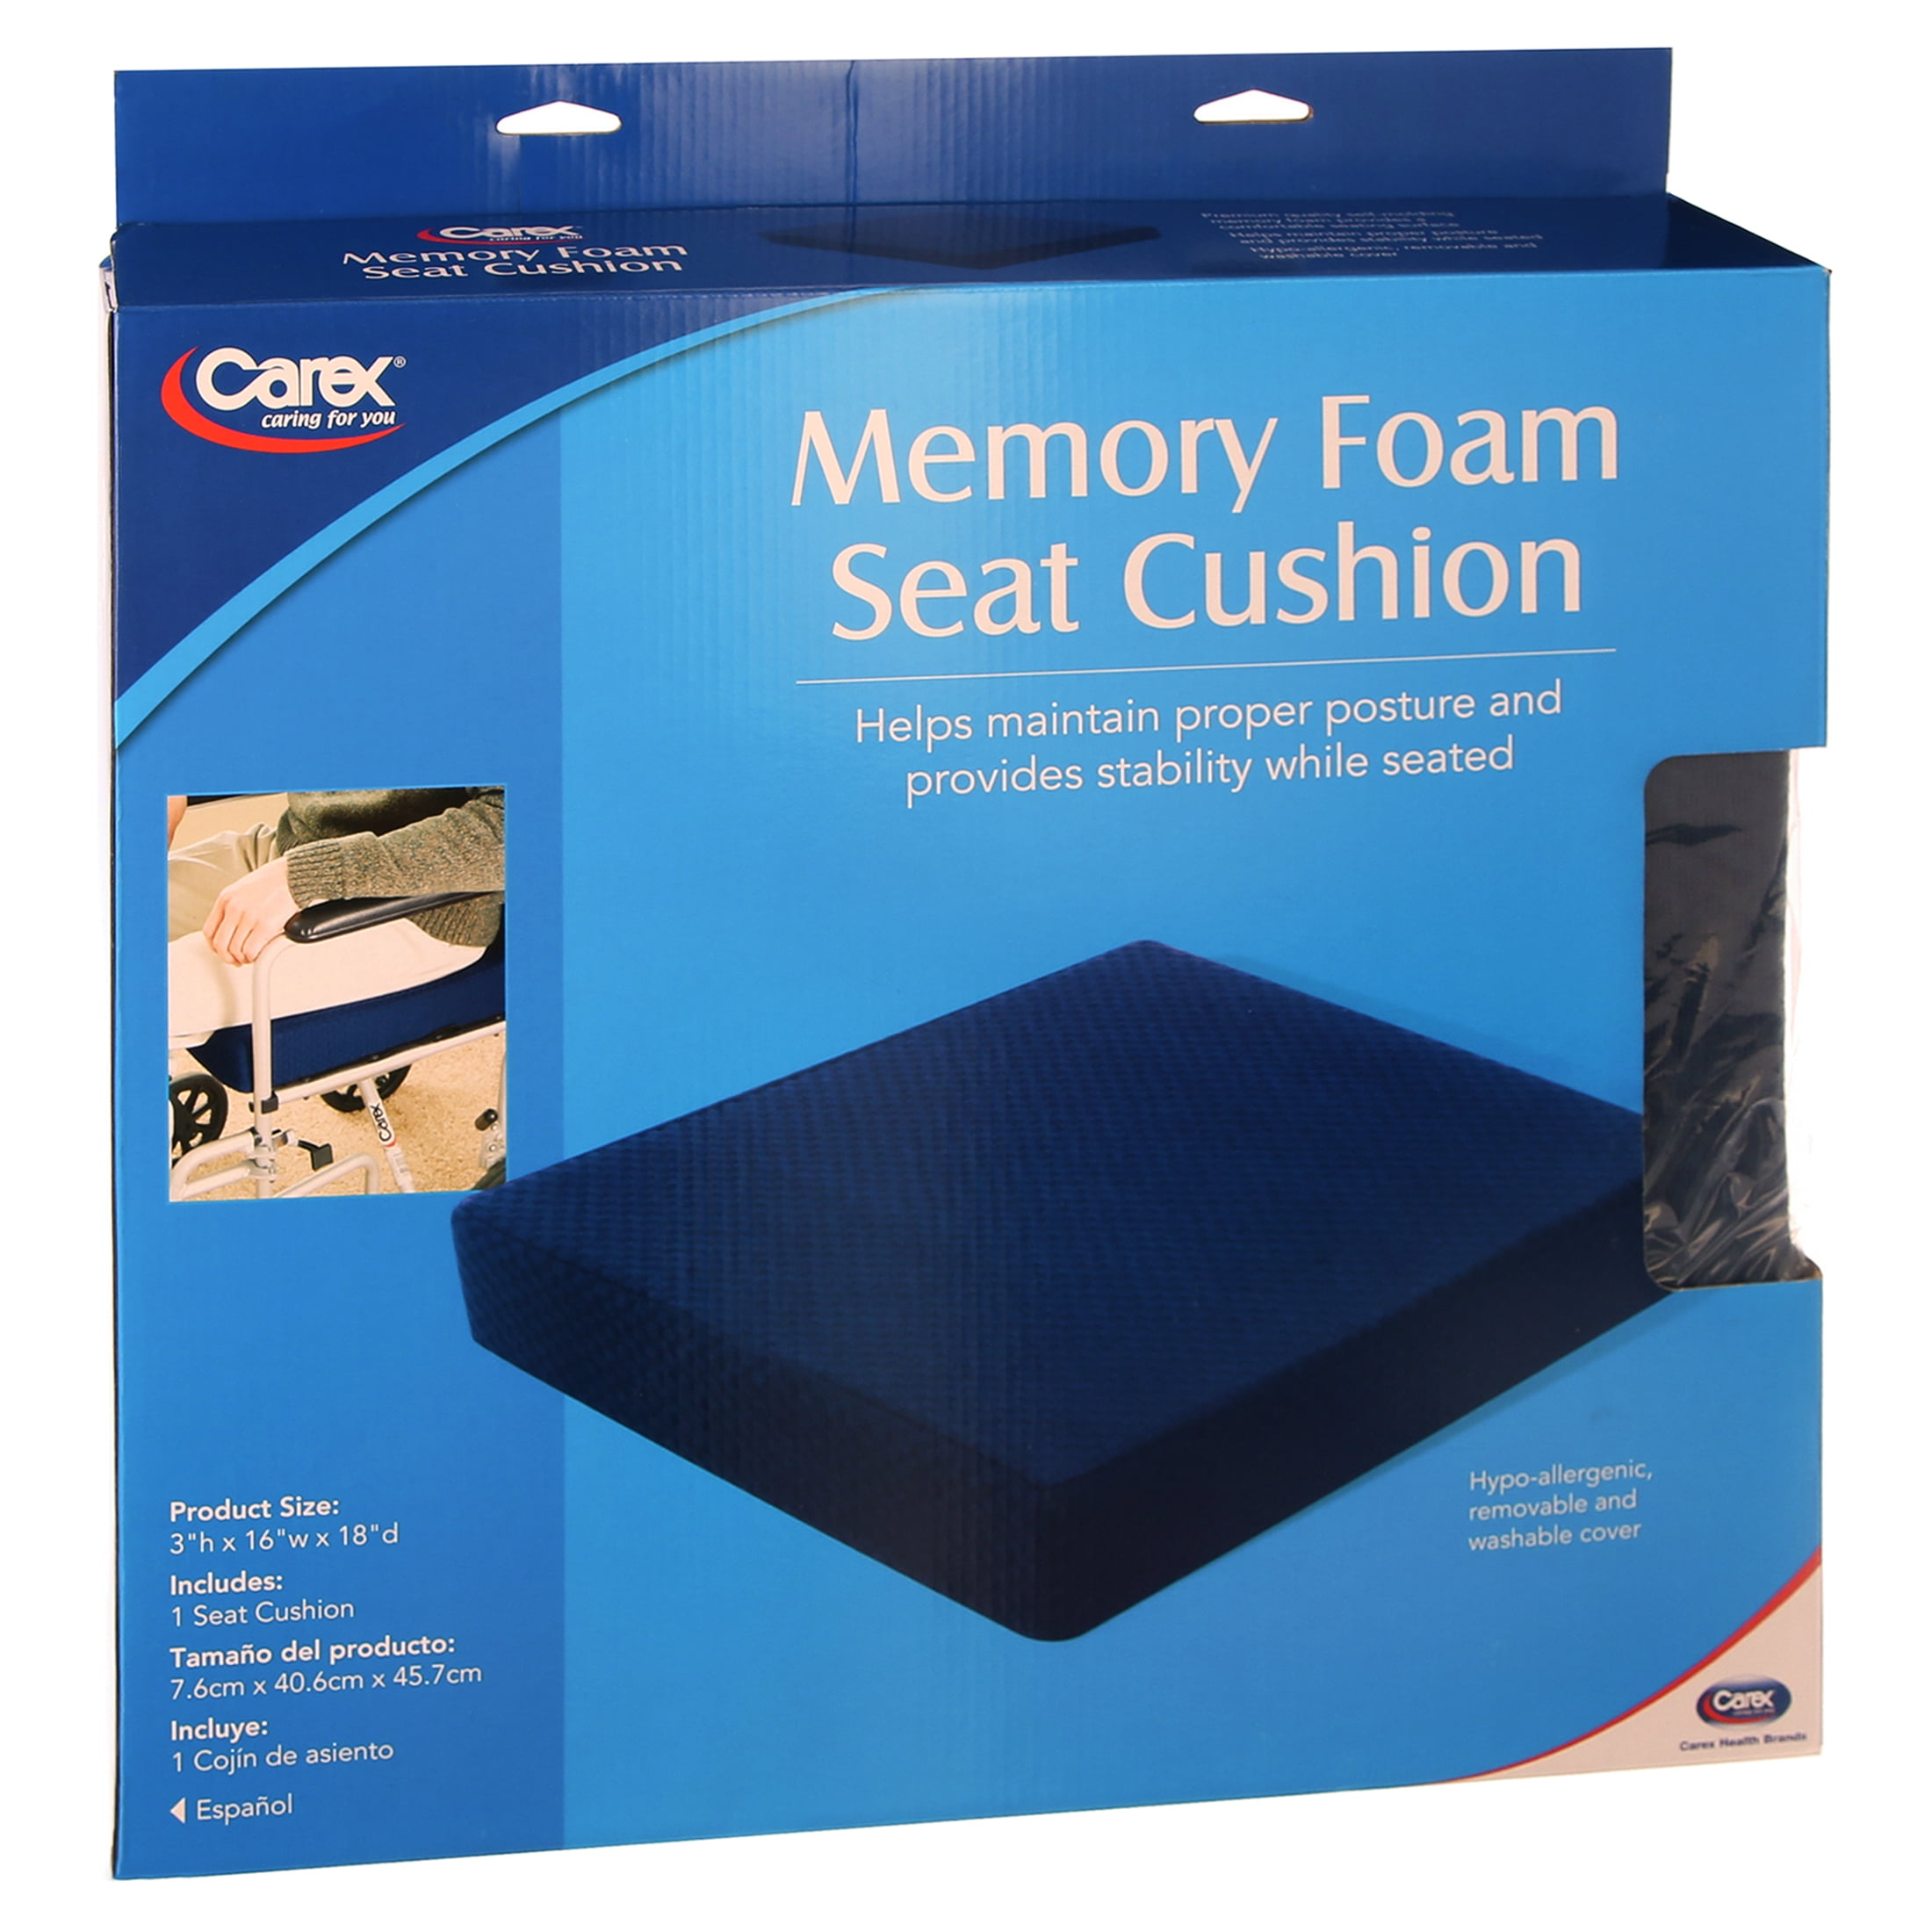 Carex Memory Foam Knee Pillow Removable Washable Cover, 1 Ea